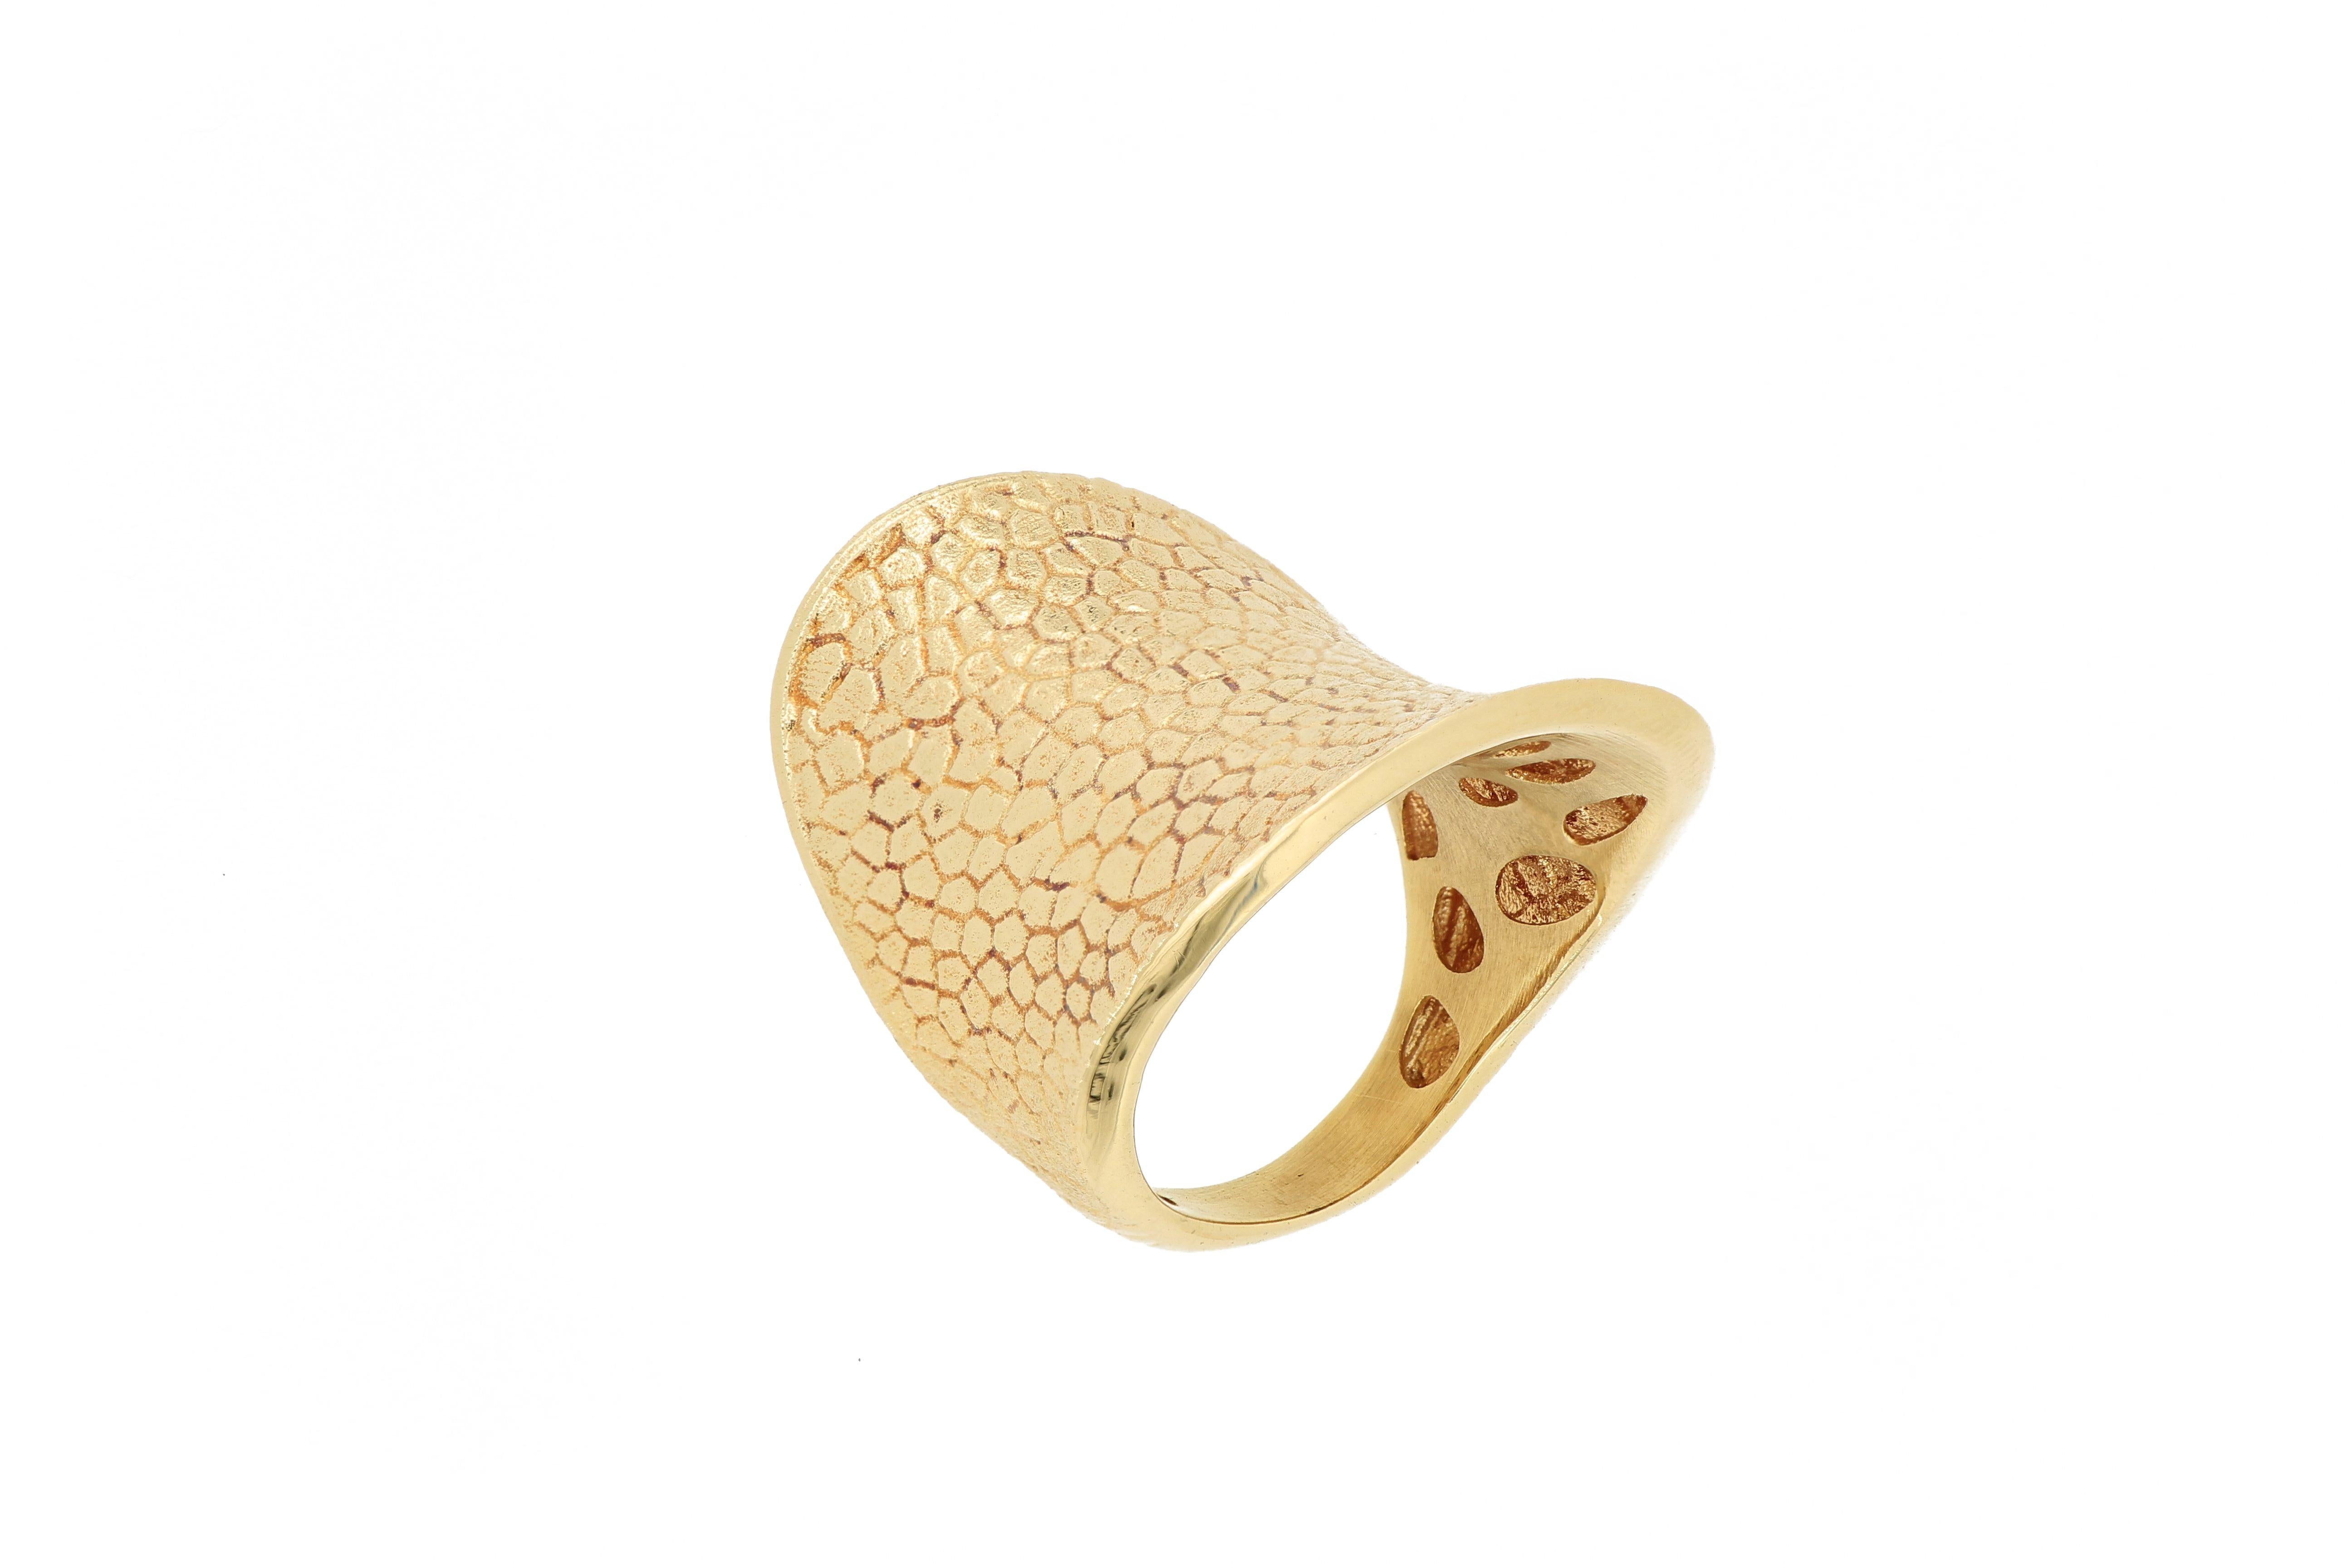 An elegant and classic ring made of 18 karat yellow gold, in a very unique saddle shape, designed and crafted in Italy.
The compnay is renowned for its high jewellery collections with fabulous designs. Our designs reflect the cultural and aesthetic